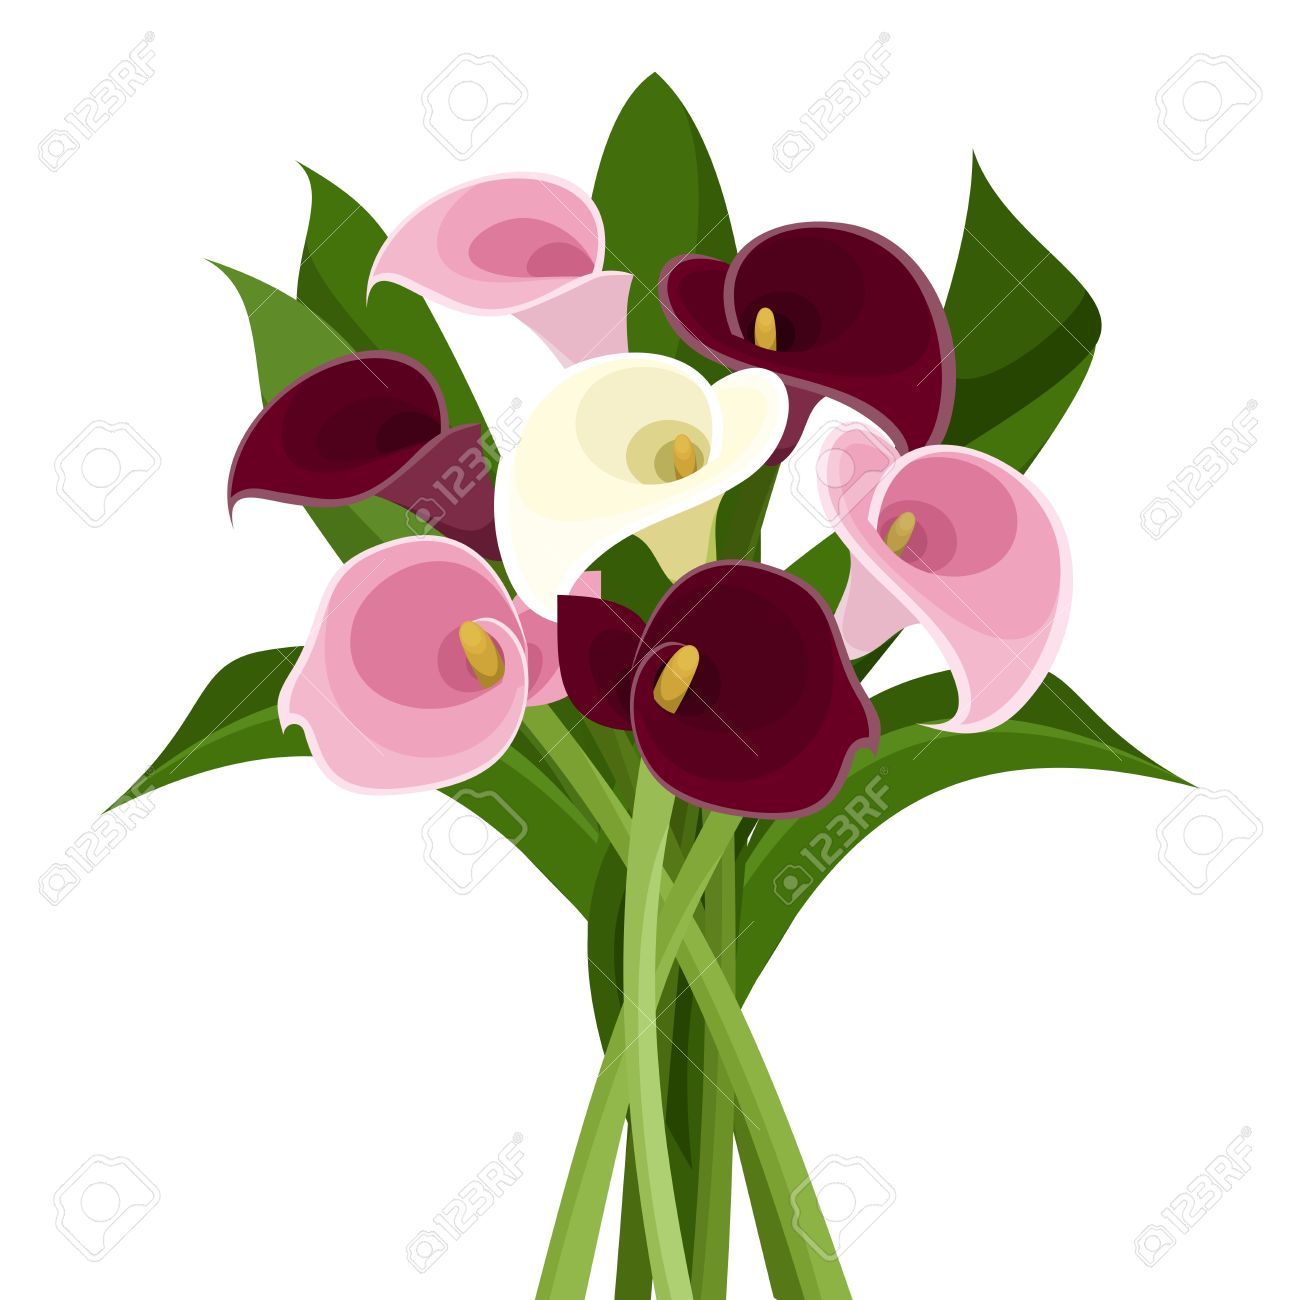 Image result for calla lilies silhouette clipart